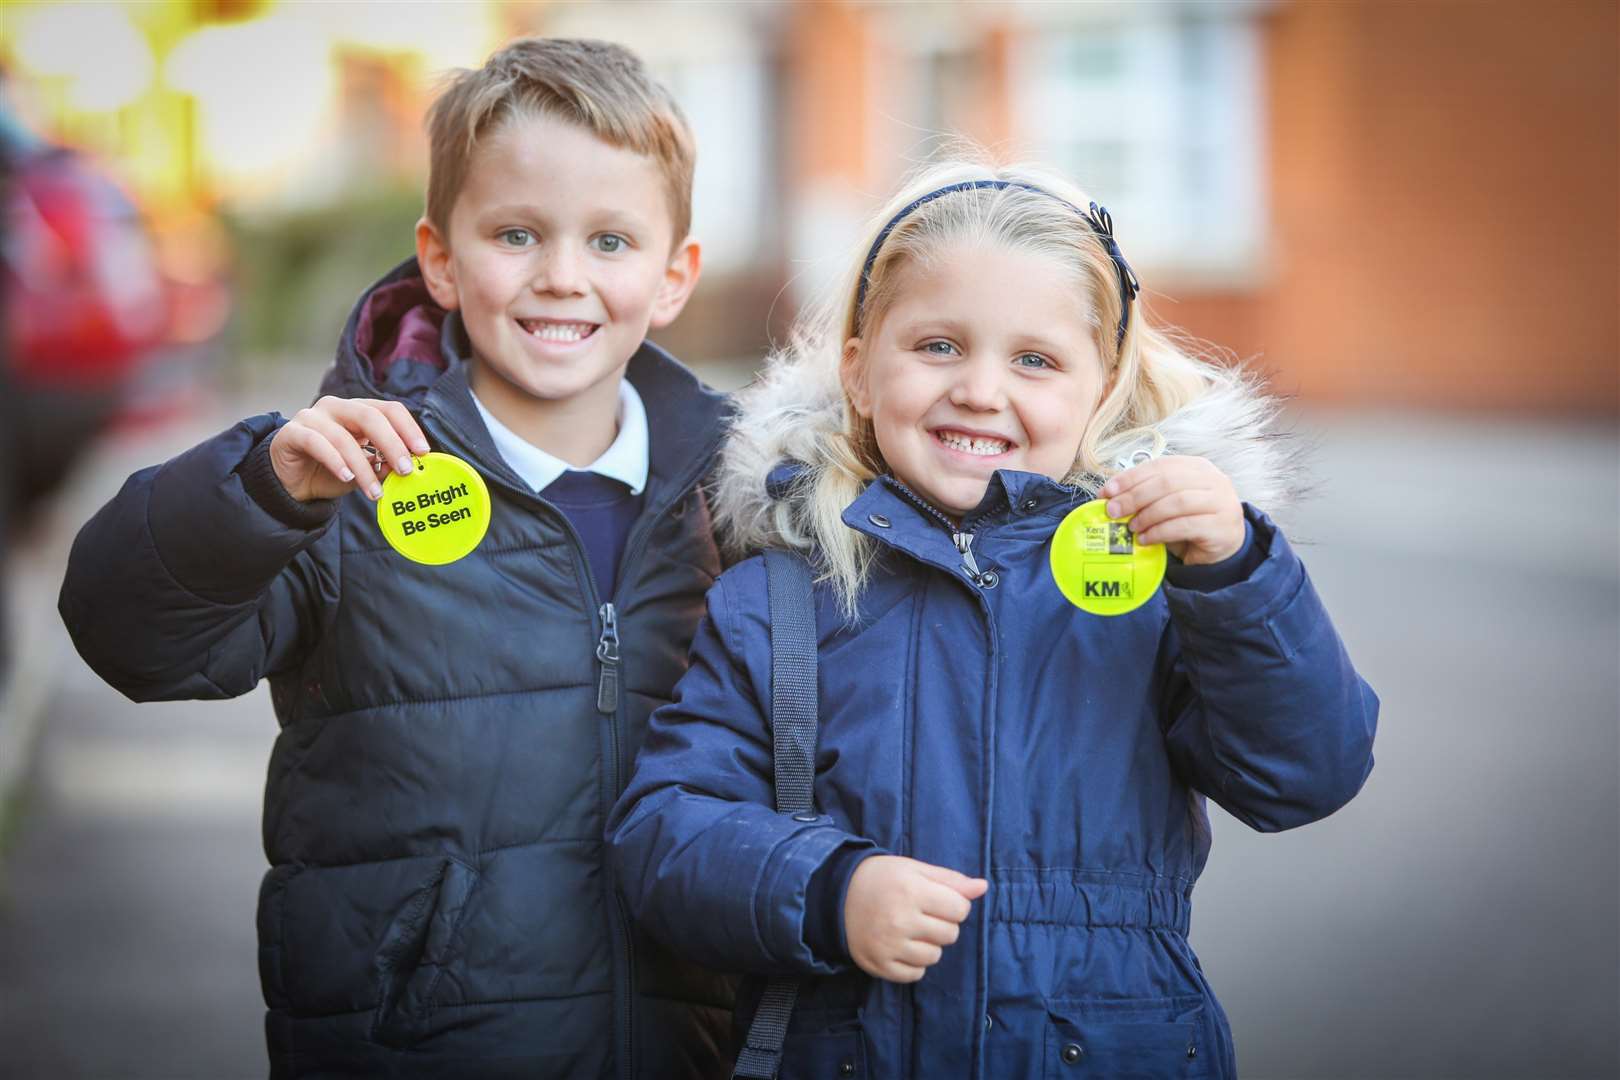 Oscar and Liv Whitlock with their Be Bright Be Seen badges